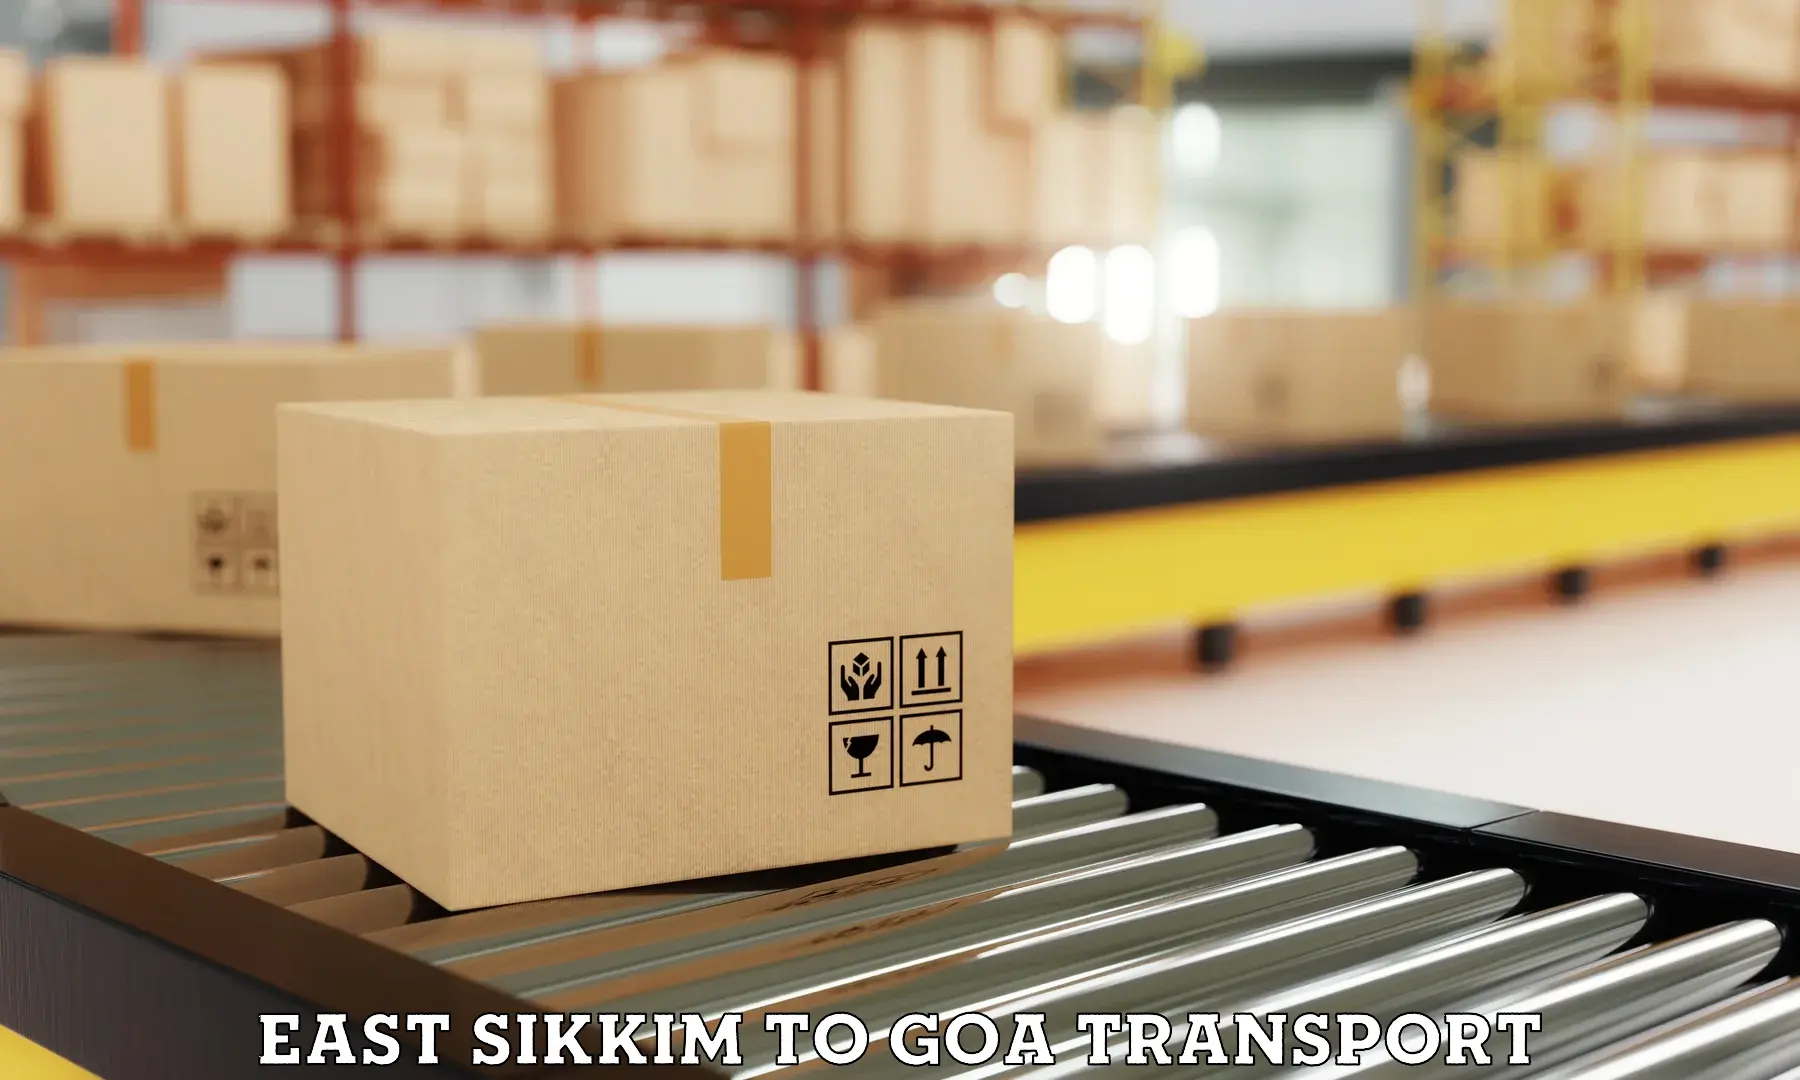 Online transport service East Sikkim to Goa